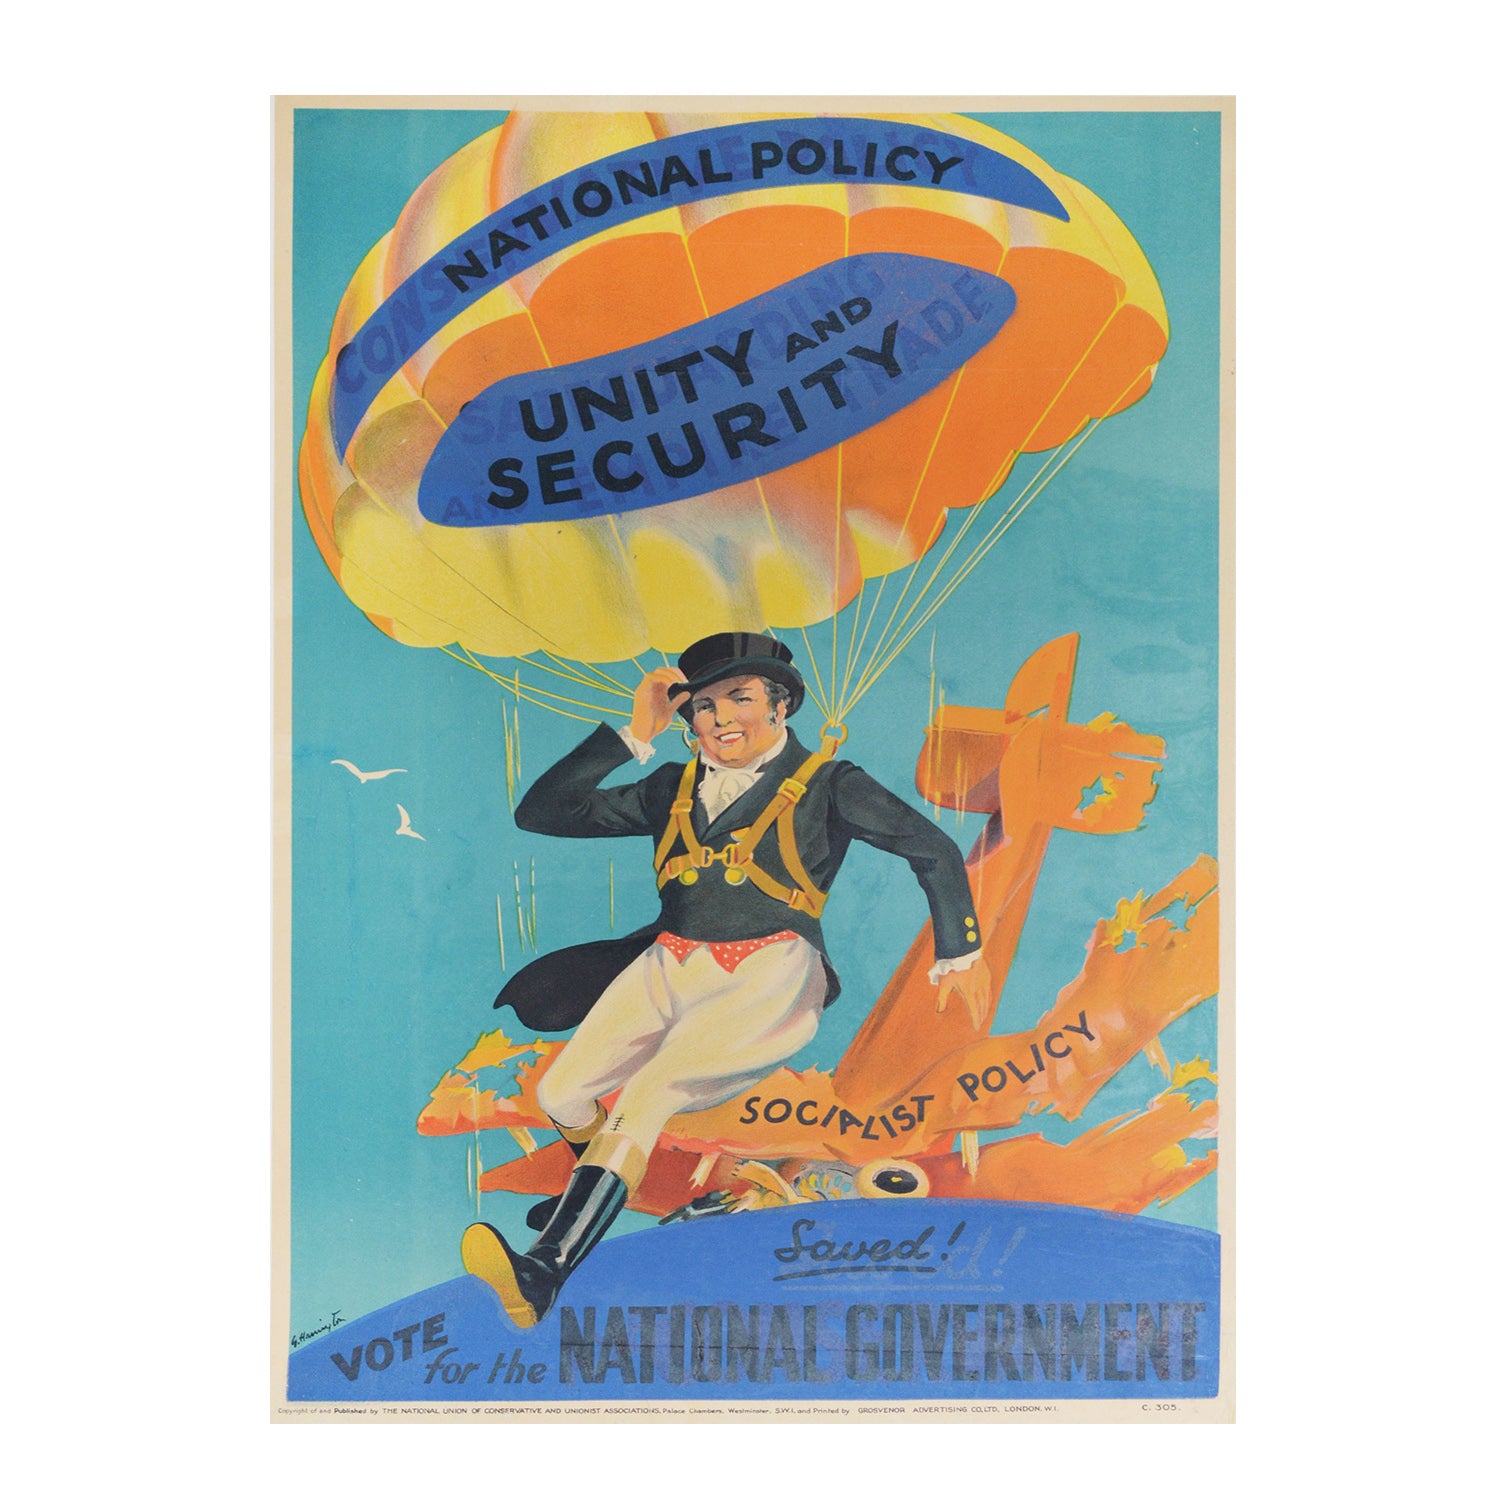 A British Conservative Party poster for the National Government coalition from the 1931 General Election. It depicts John Bull escaping the ‘plane crash’ of Socialist policy with the parachute of National Policy (Unity and Security).